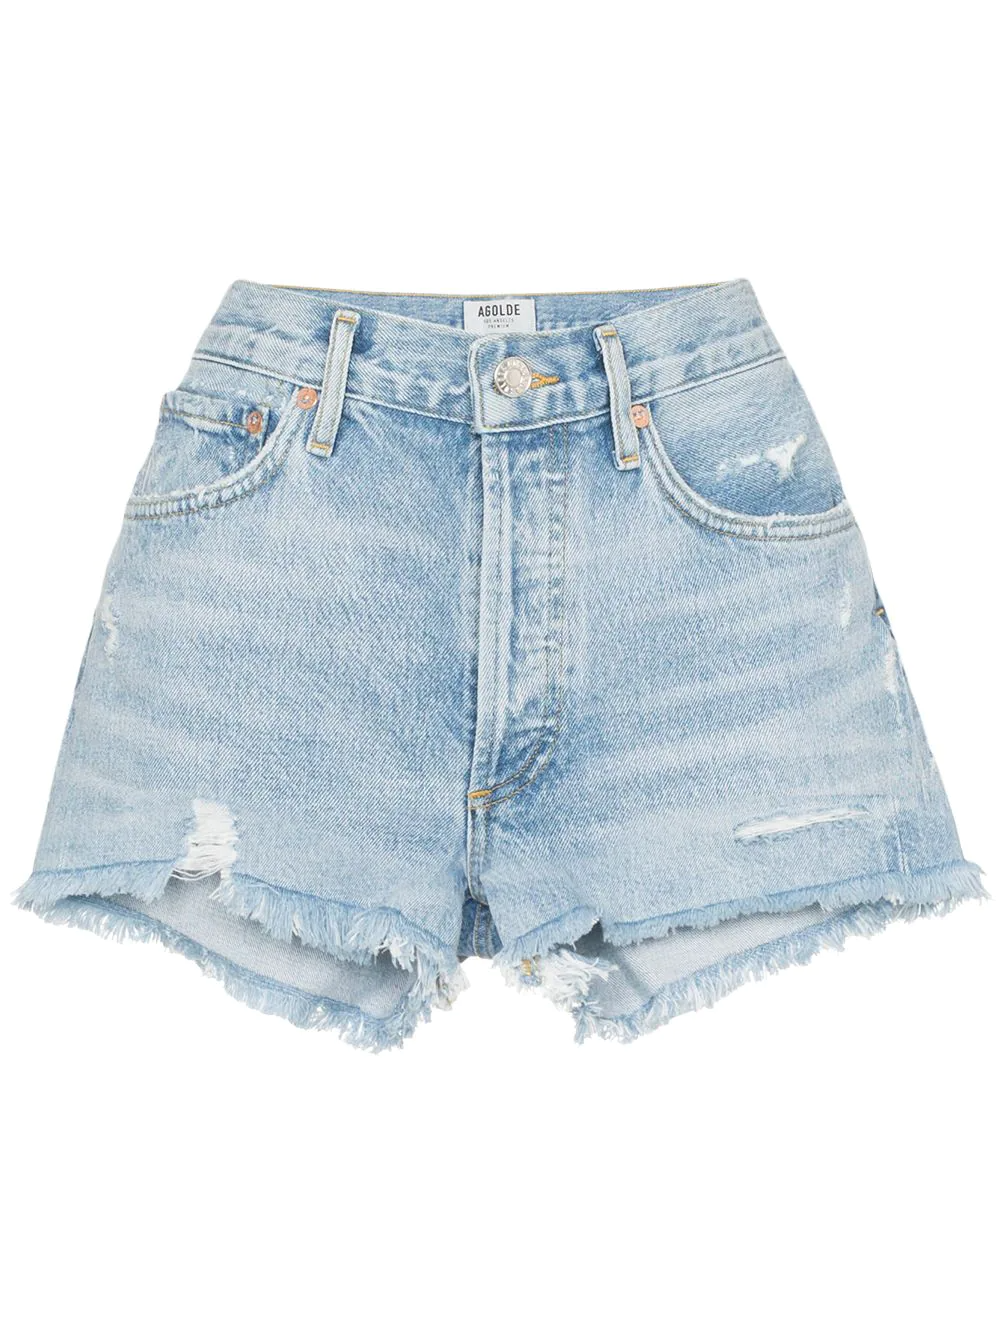 Best 15 Distressed Jean Shorts Outfit Ideas for Women: Style Guide